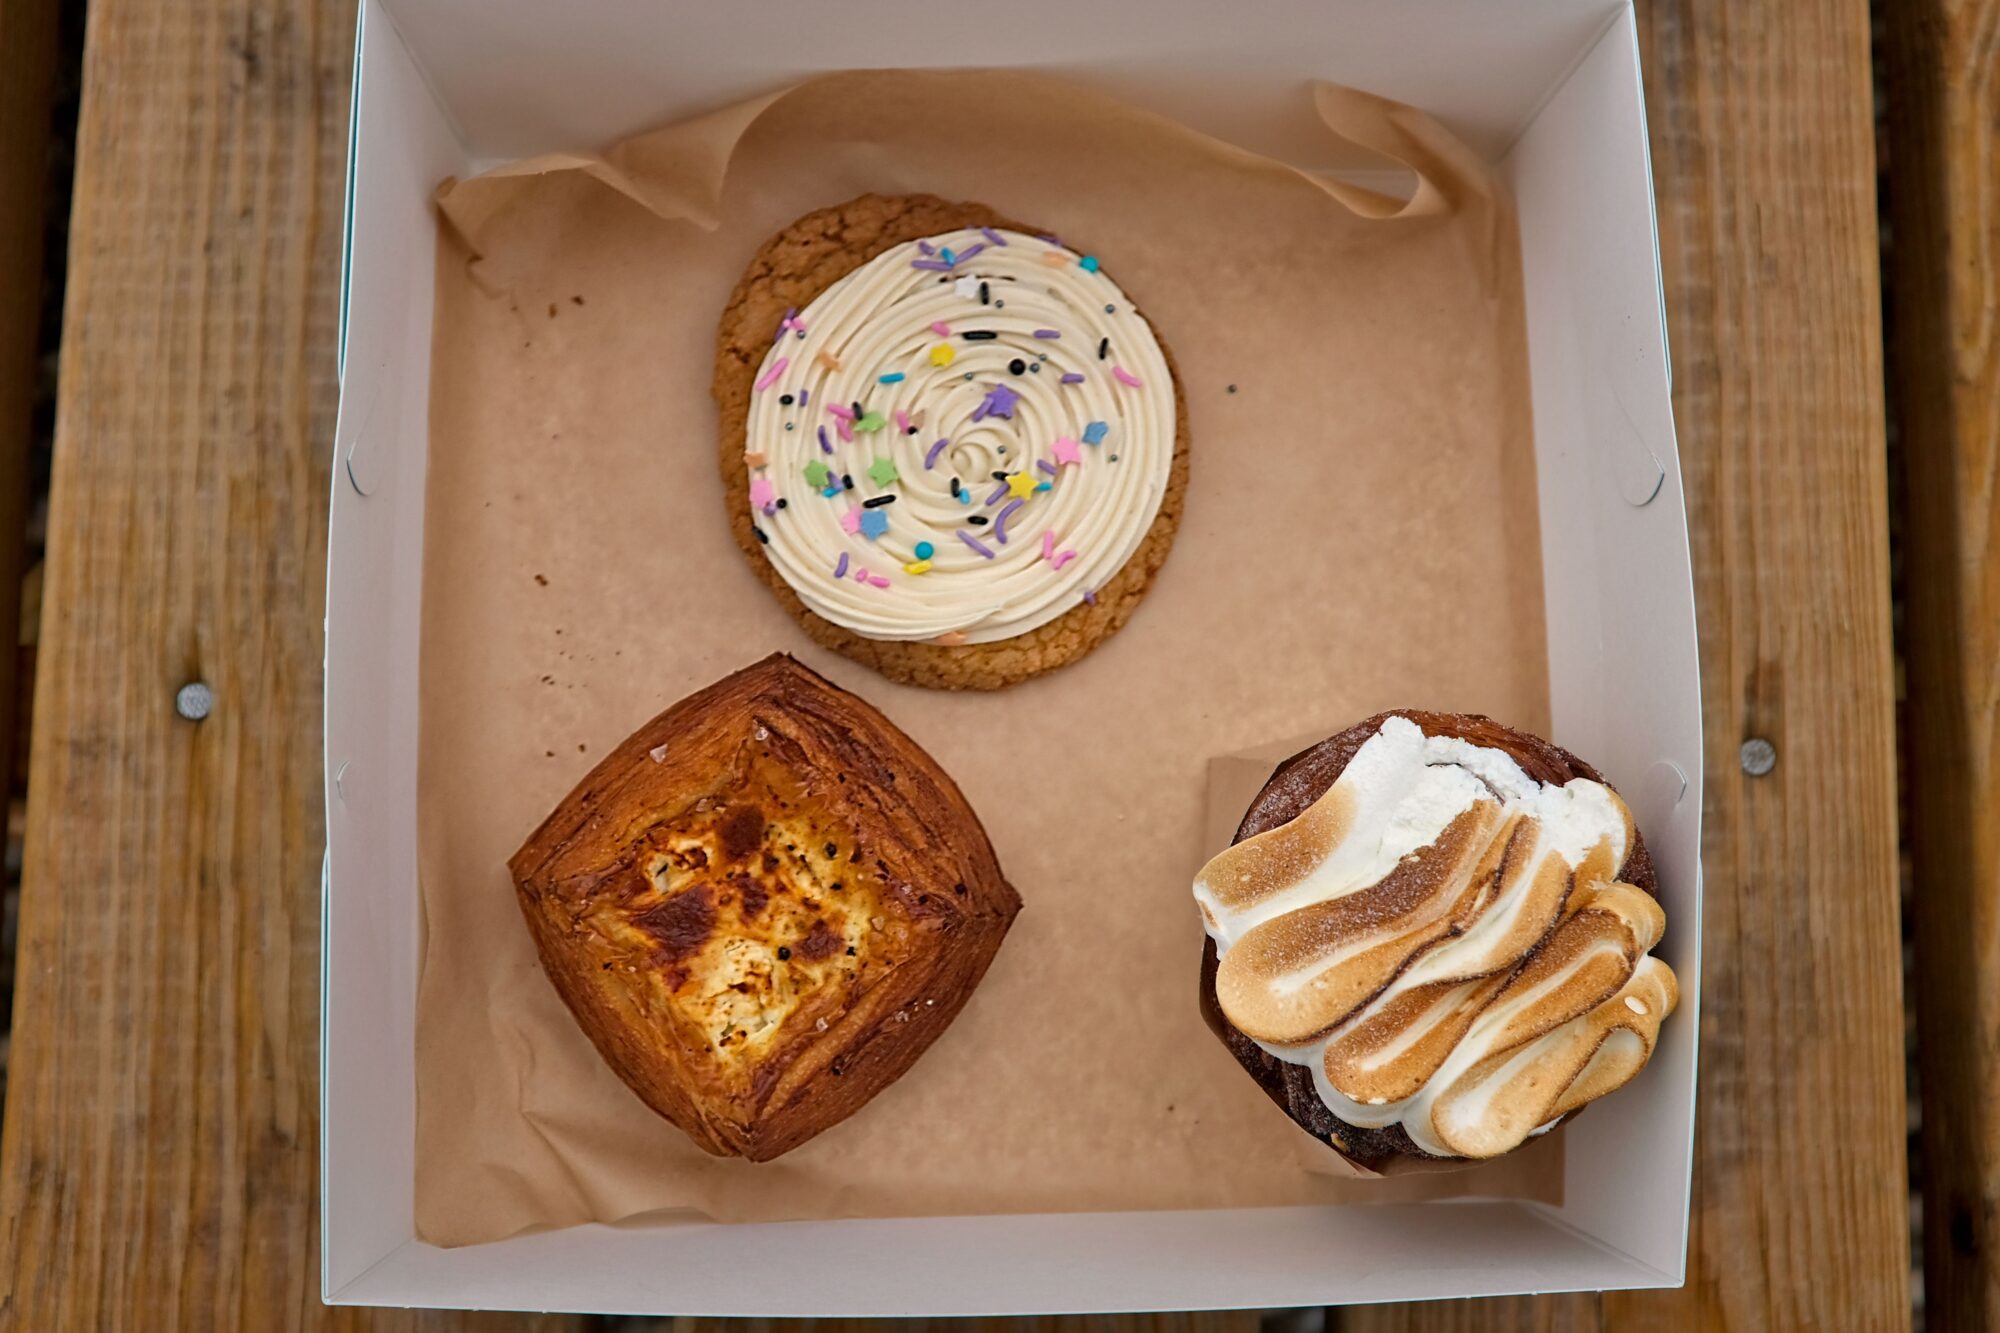 A trio of pastries from Virtuoso Breadworks in Waxhaw